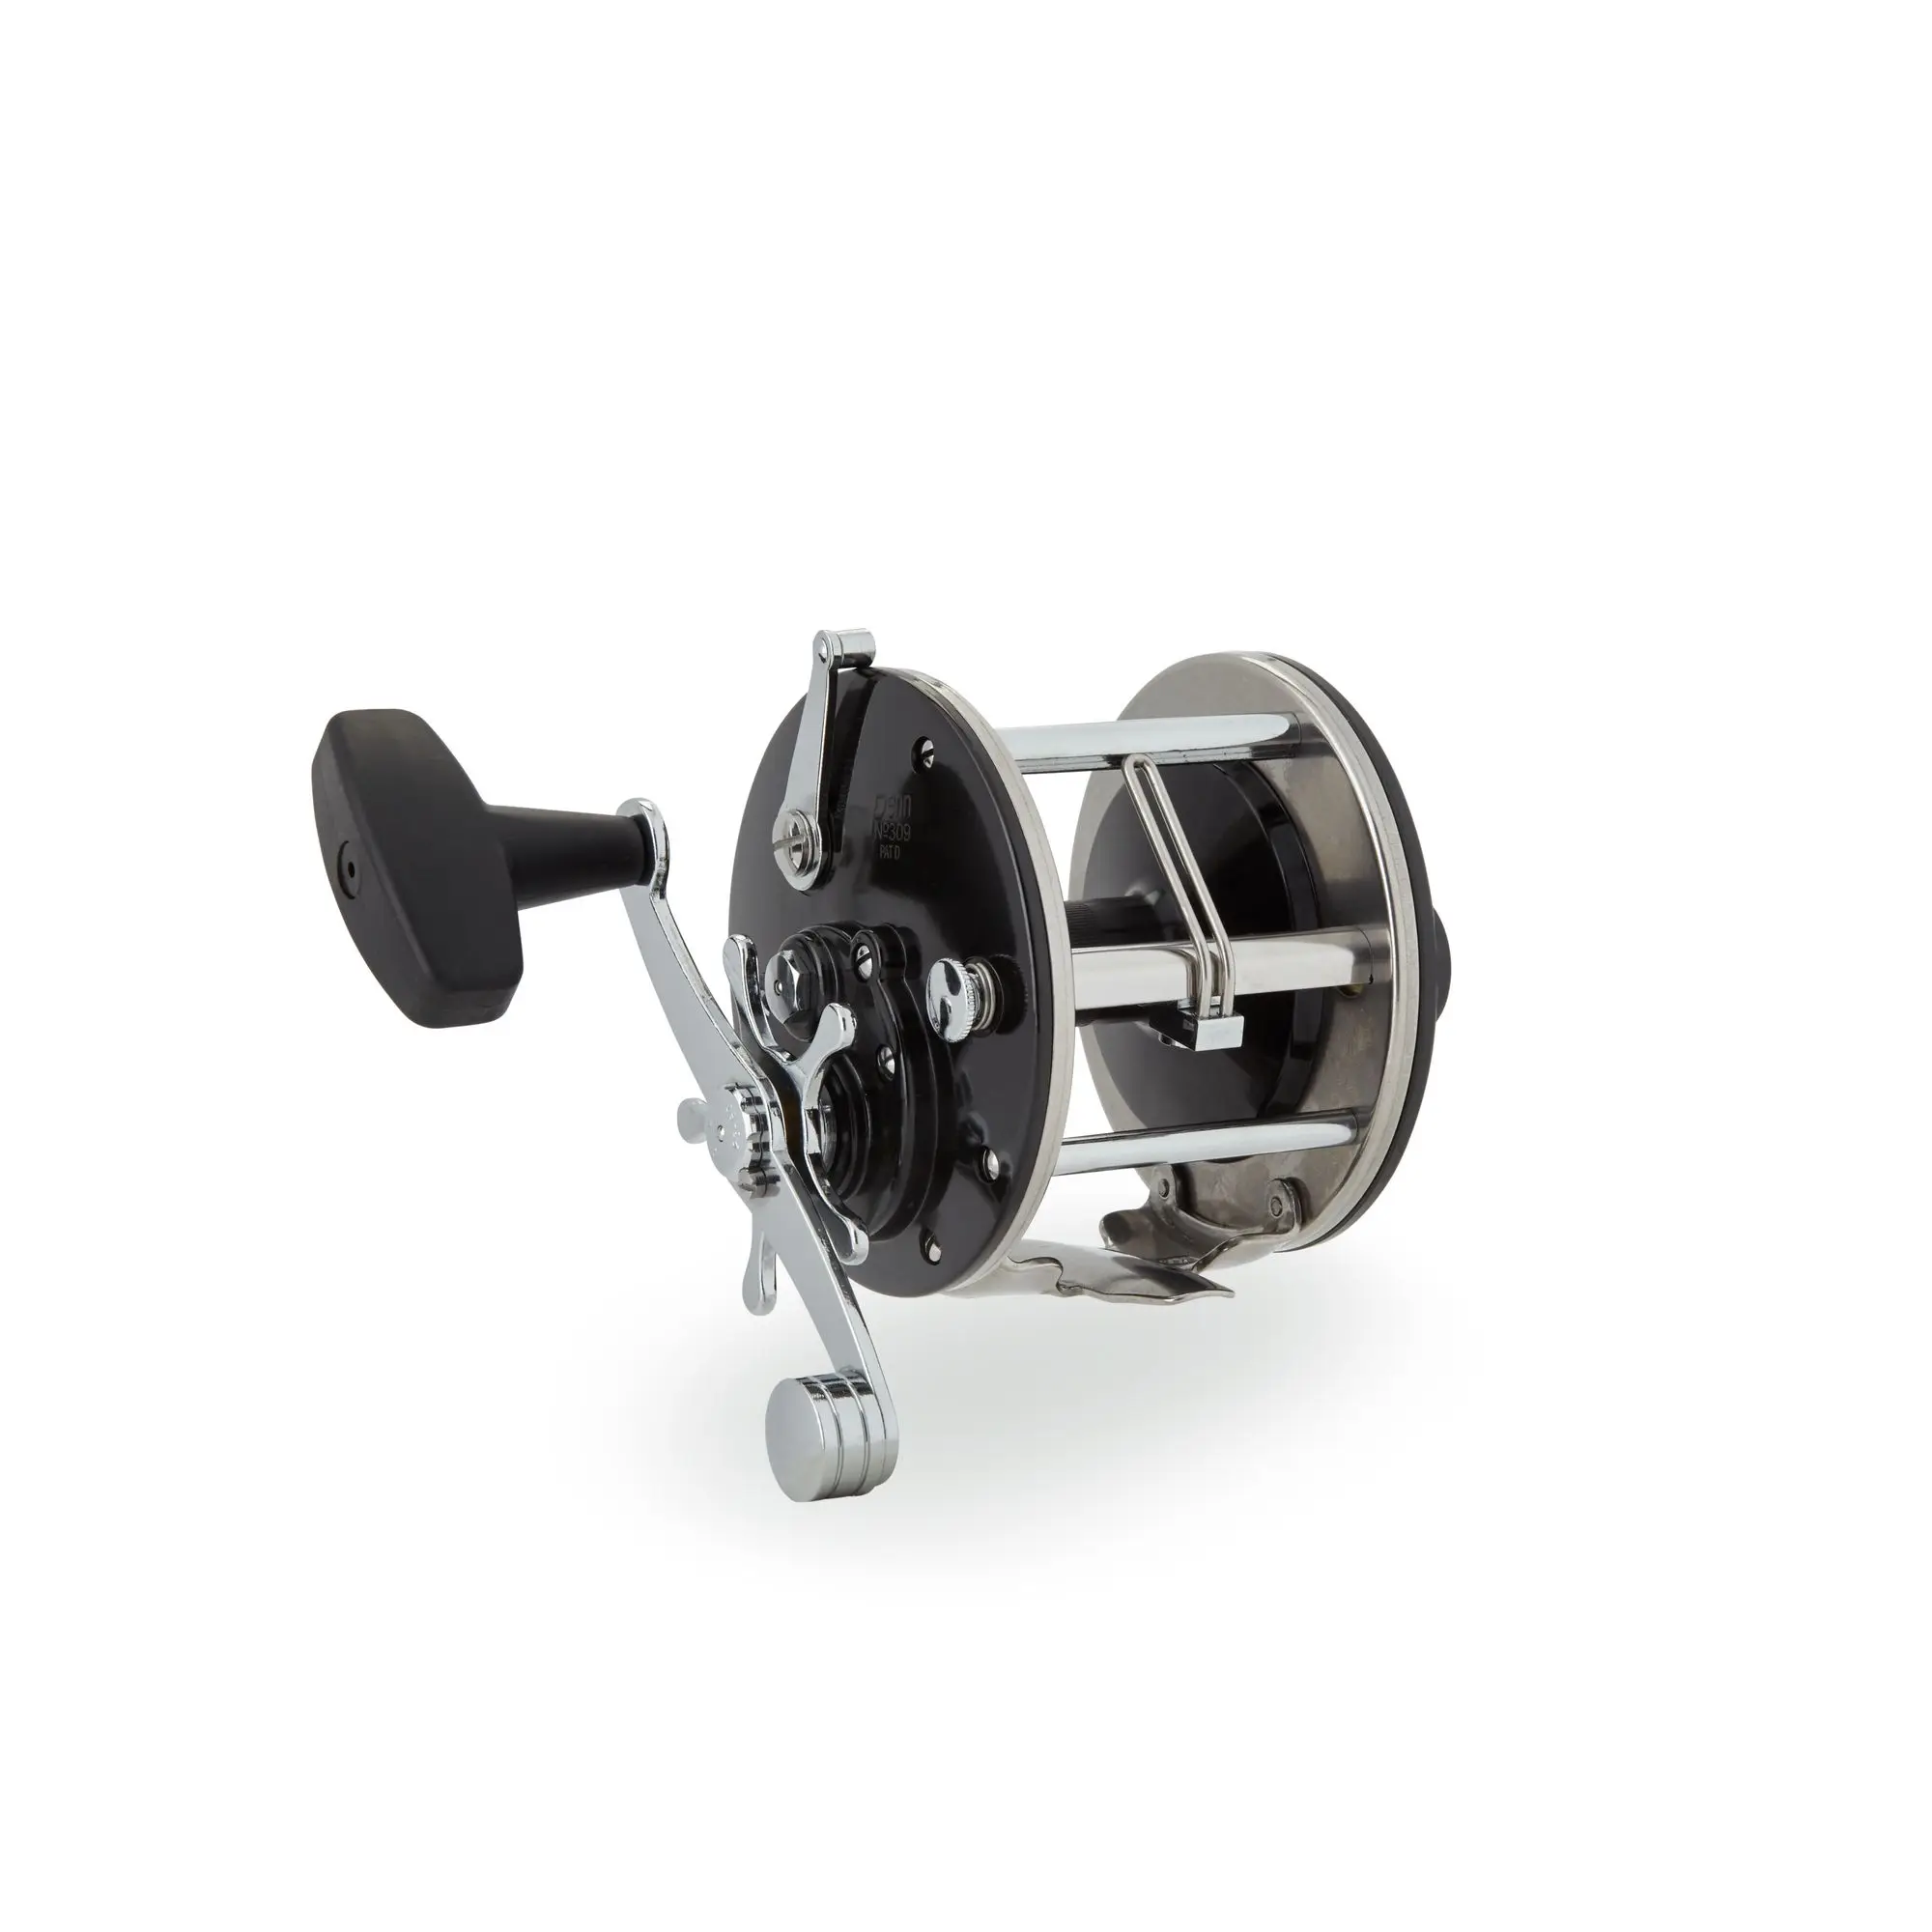 General Purpose Level Wind Conventional Fishing Reel, Size 309 enlarge